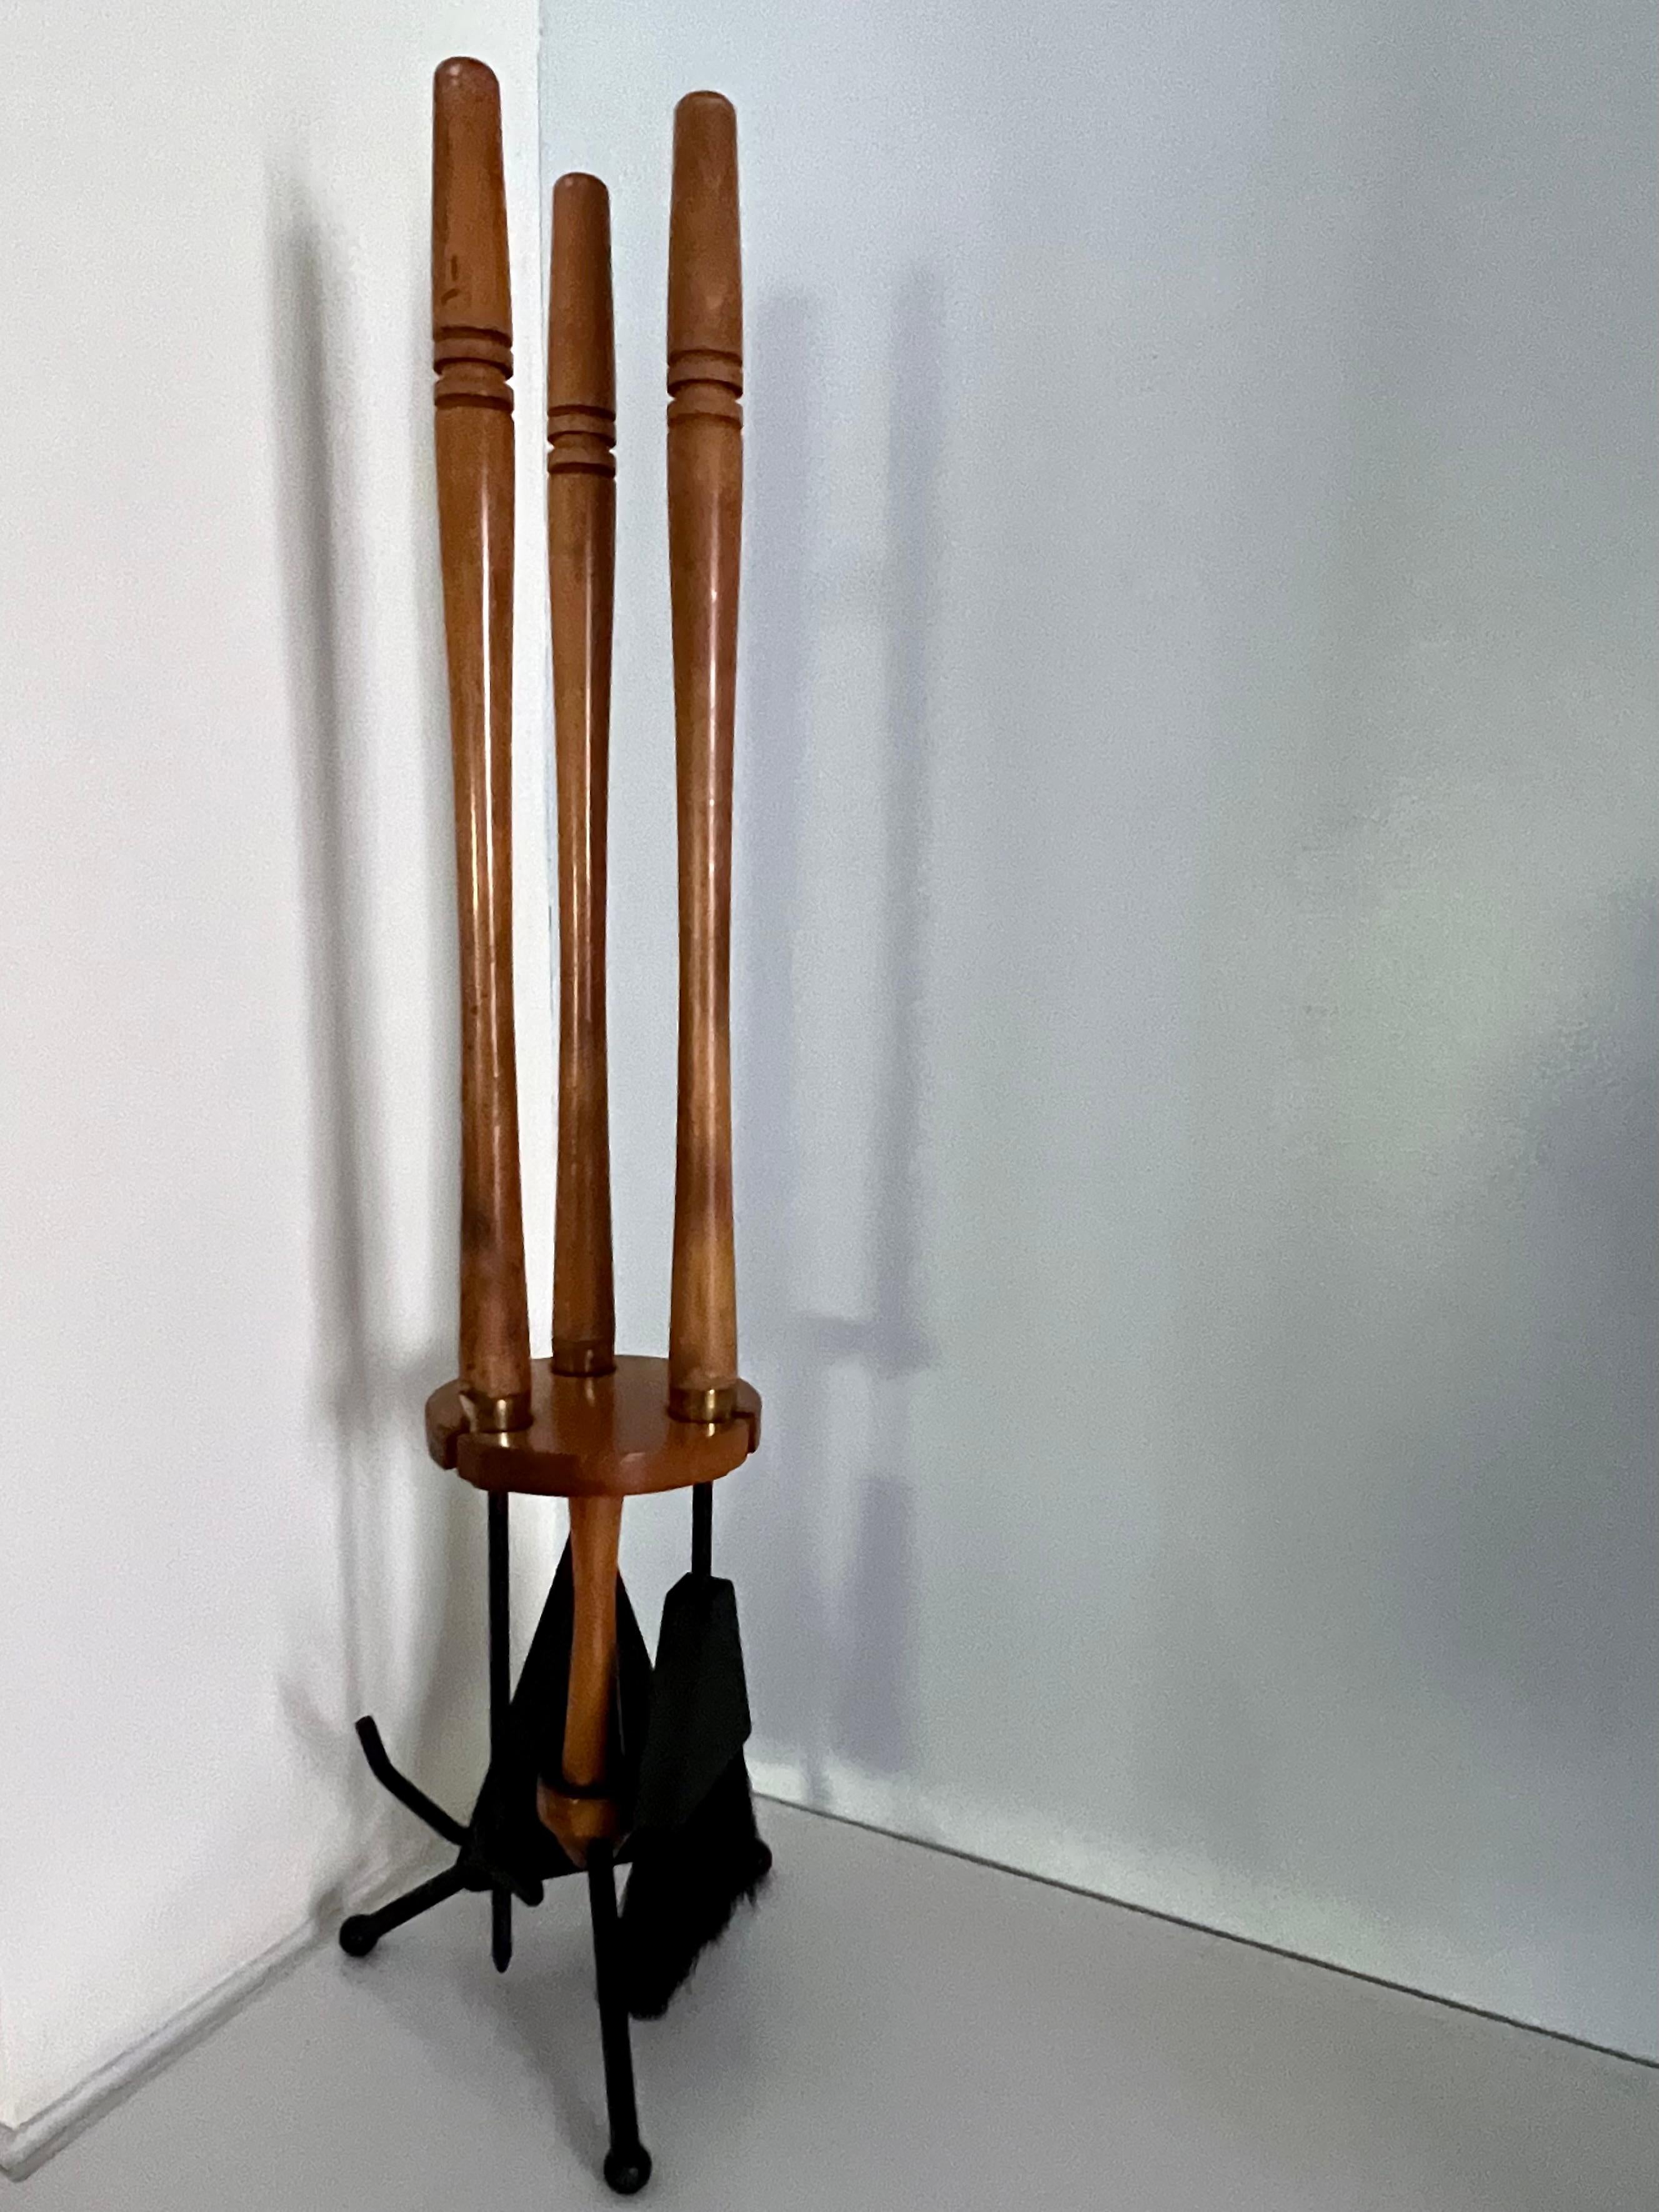 20th Century Arthur Umanoff Modernist Wooden Fireplace Tools in Wooden Stand For Sale